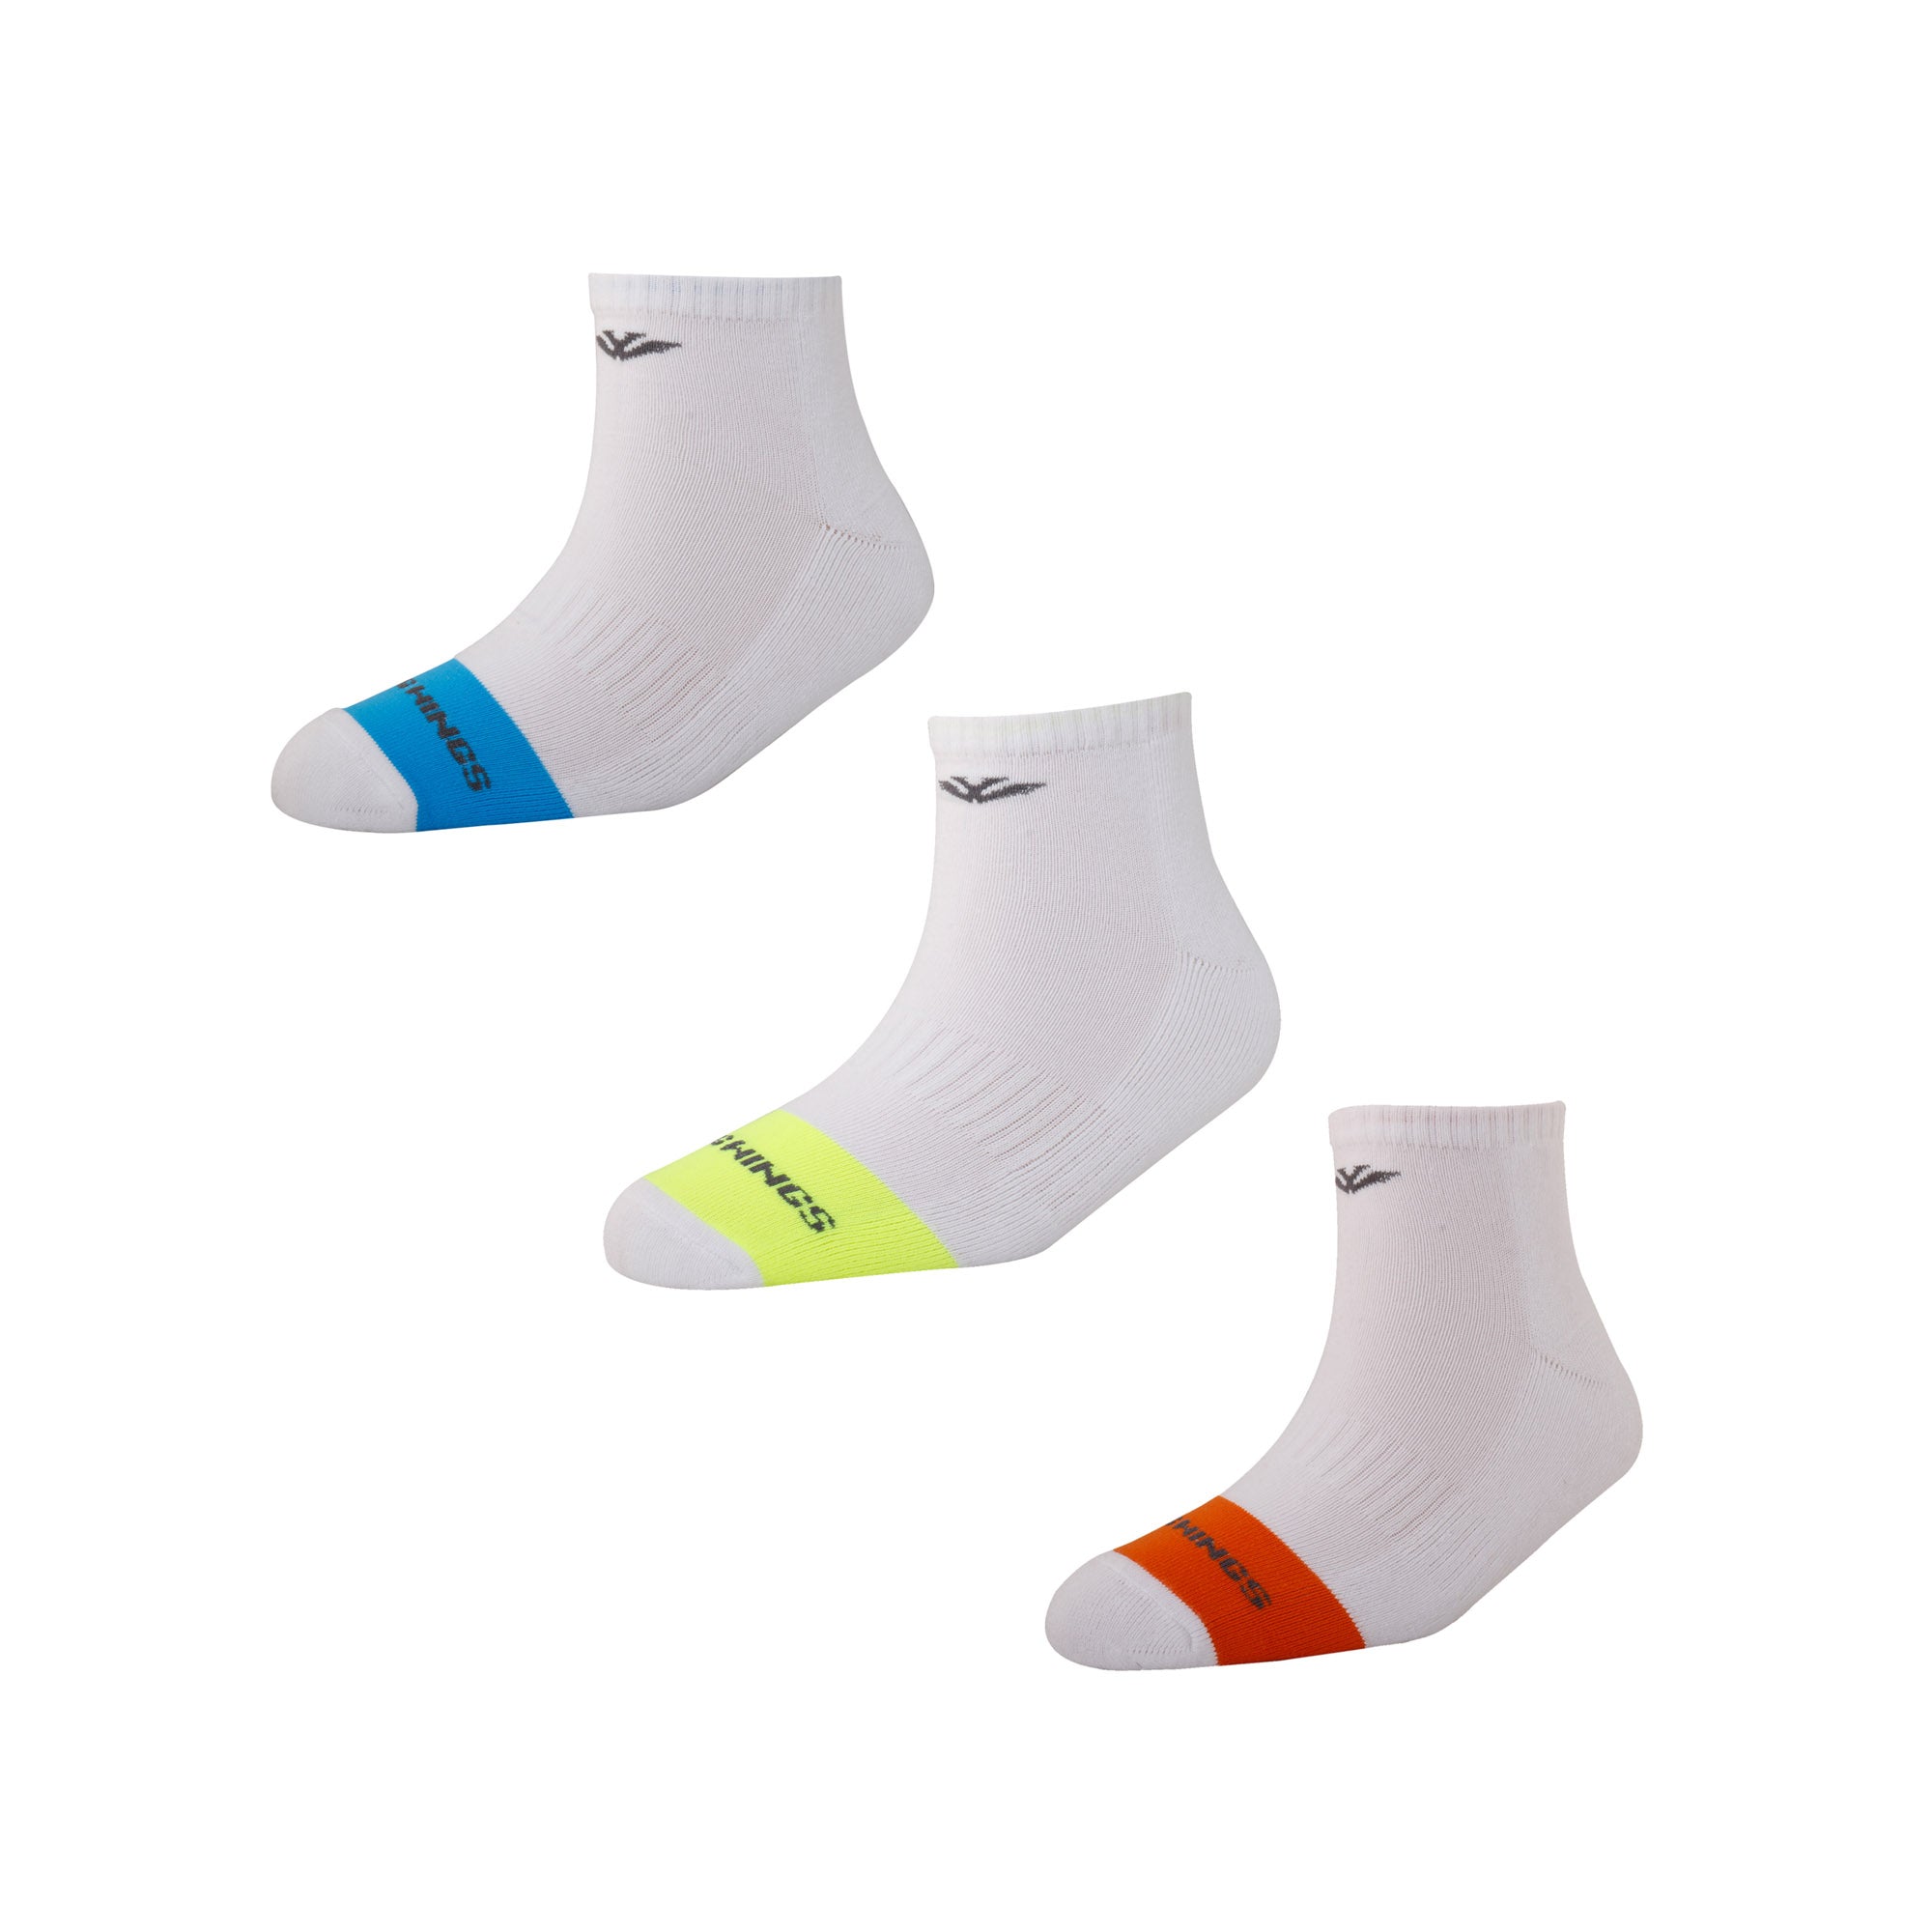 Men's TS01 Pack of 3 Cotton Terry Fashion Sports Ankle Socks